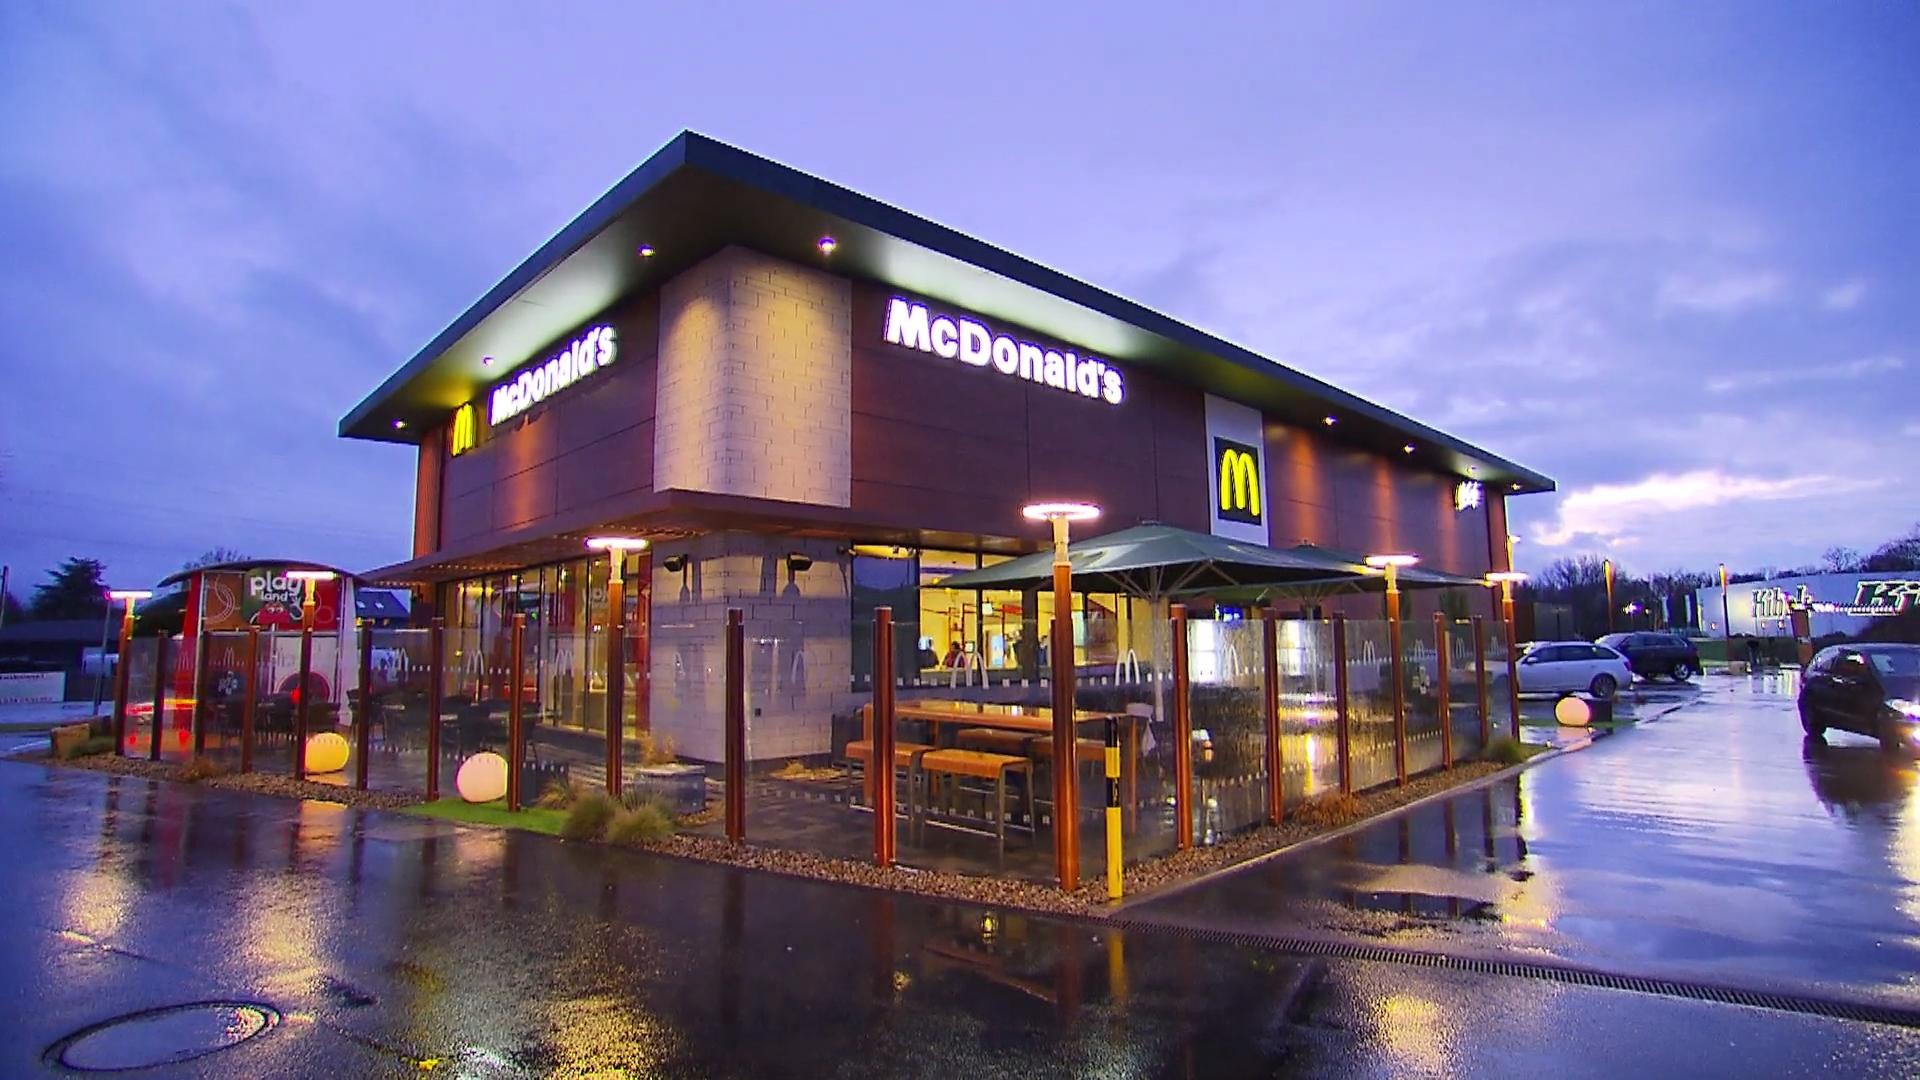 You can now get married at McDonald's!  A fast food romance